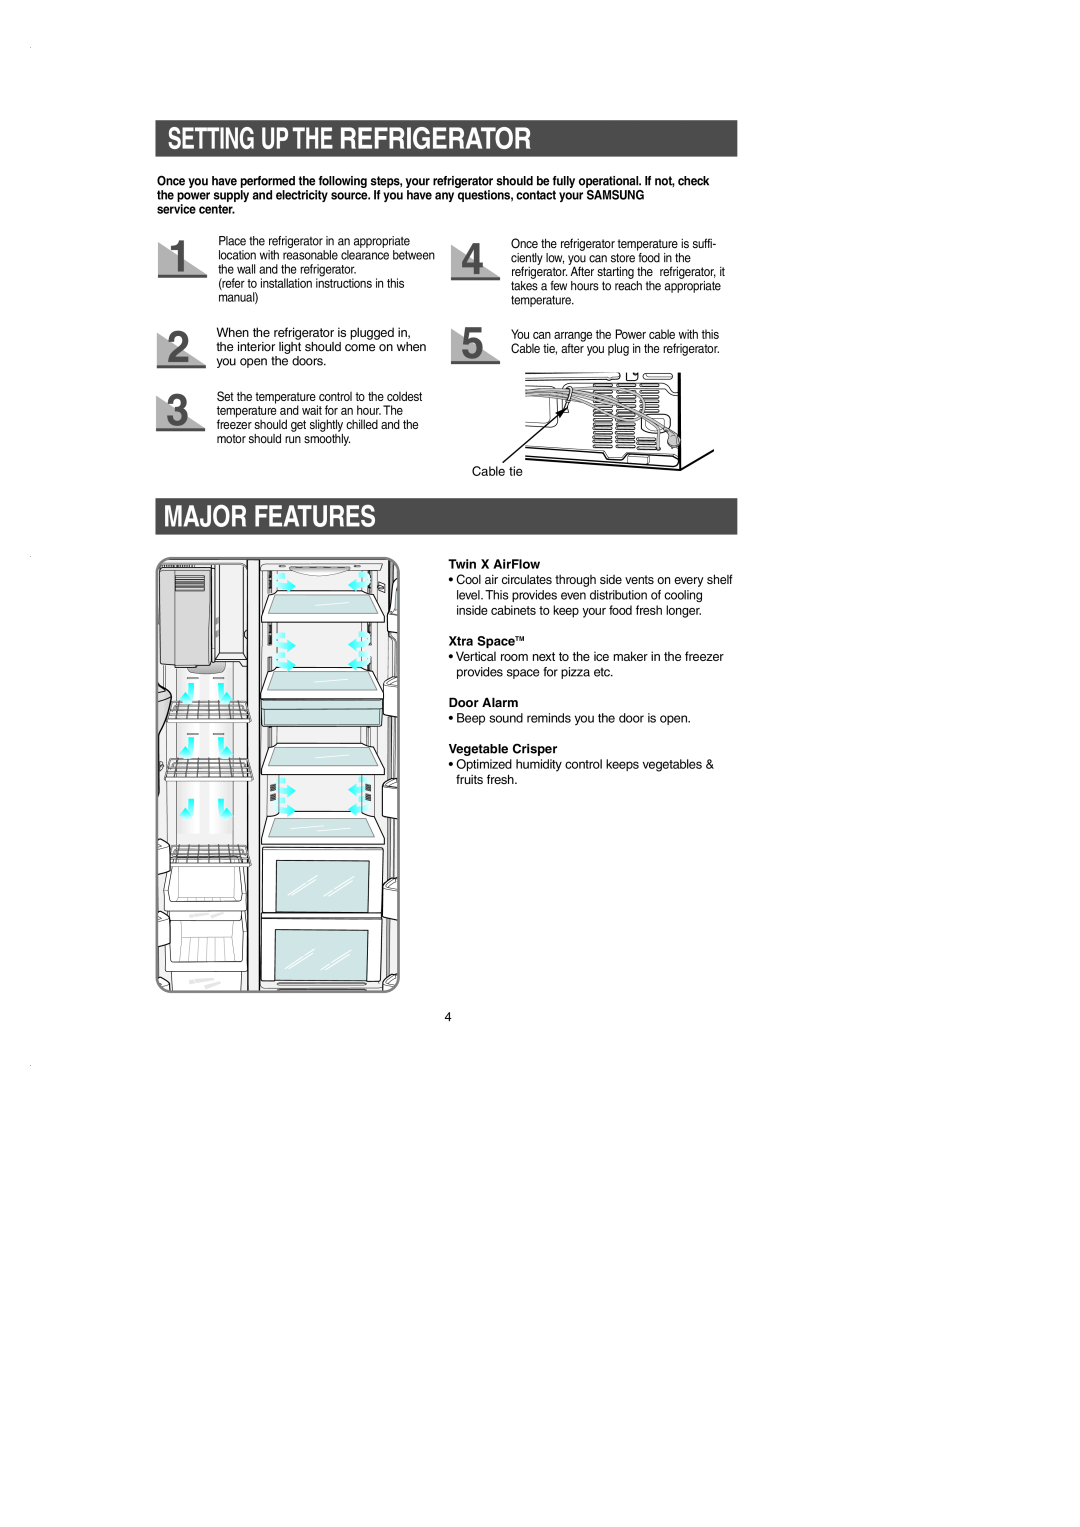 Samsung RS2530B Setting Up The Refrigerator, Major Features, service center, Twin X AirFlow, Xtra SpaceTM, Door Alarm 